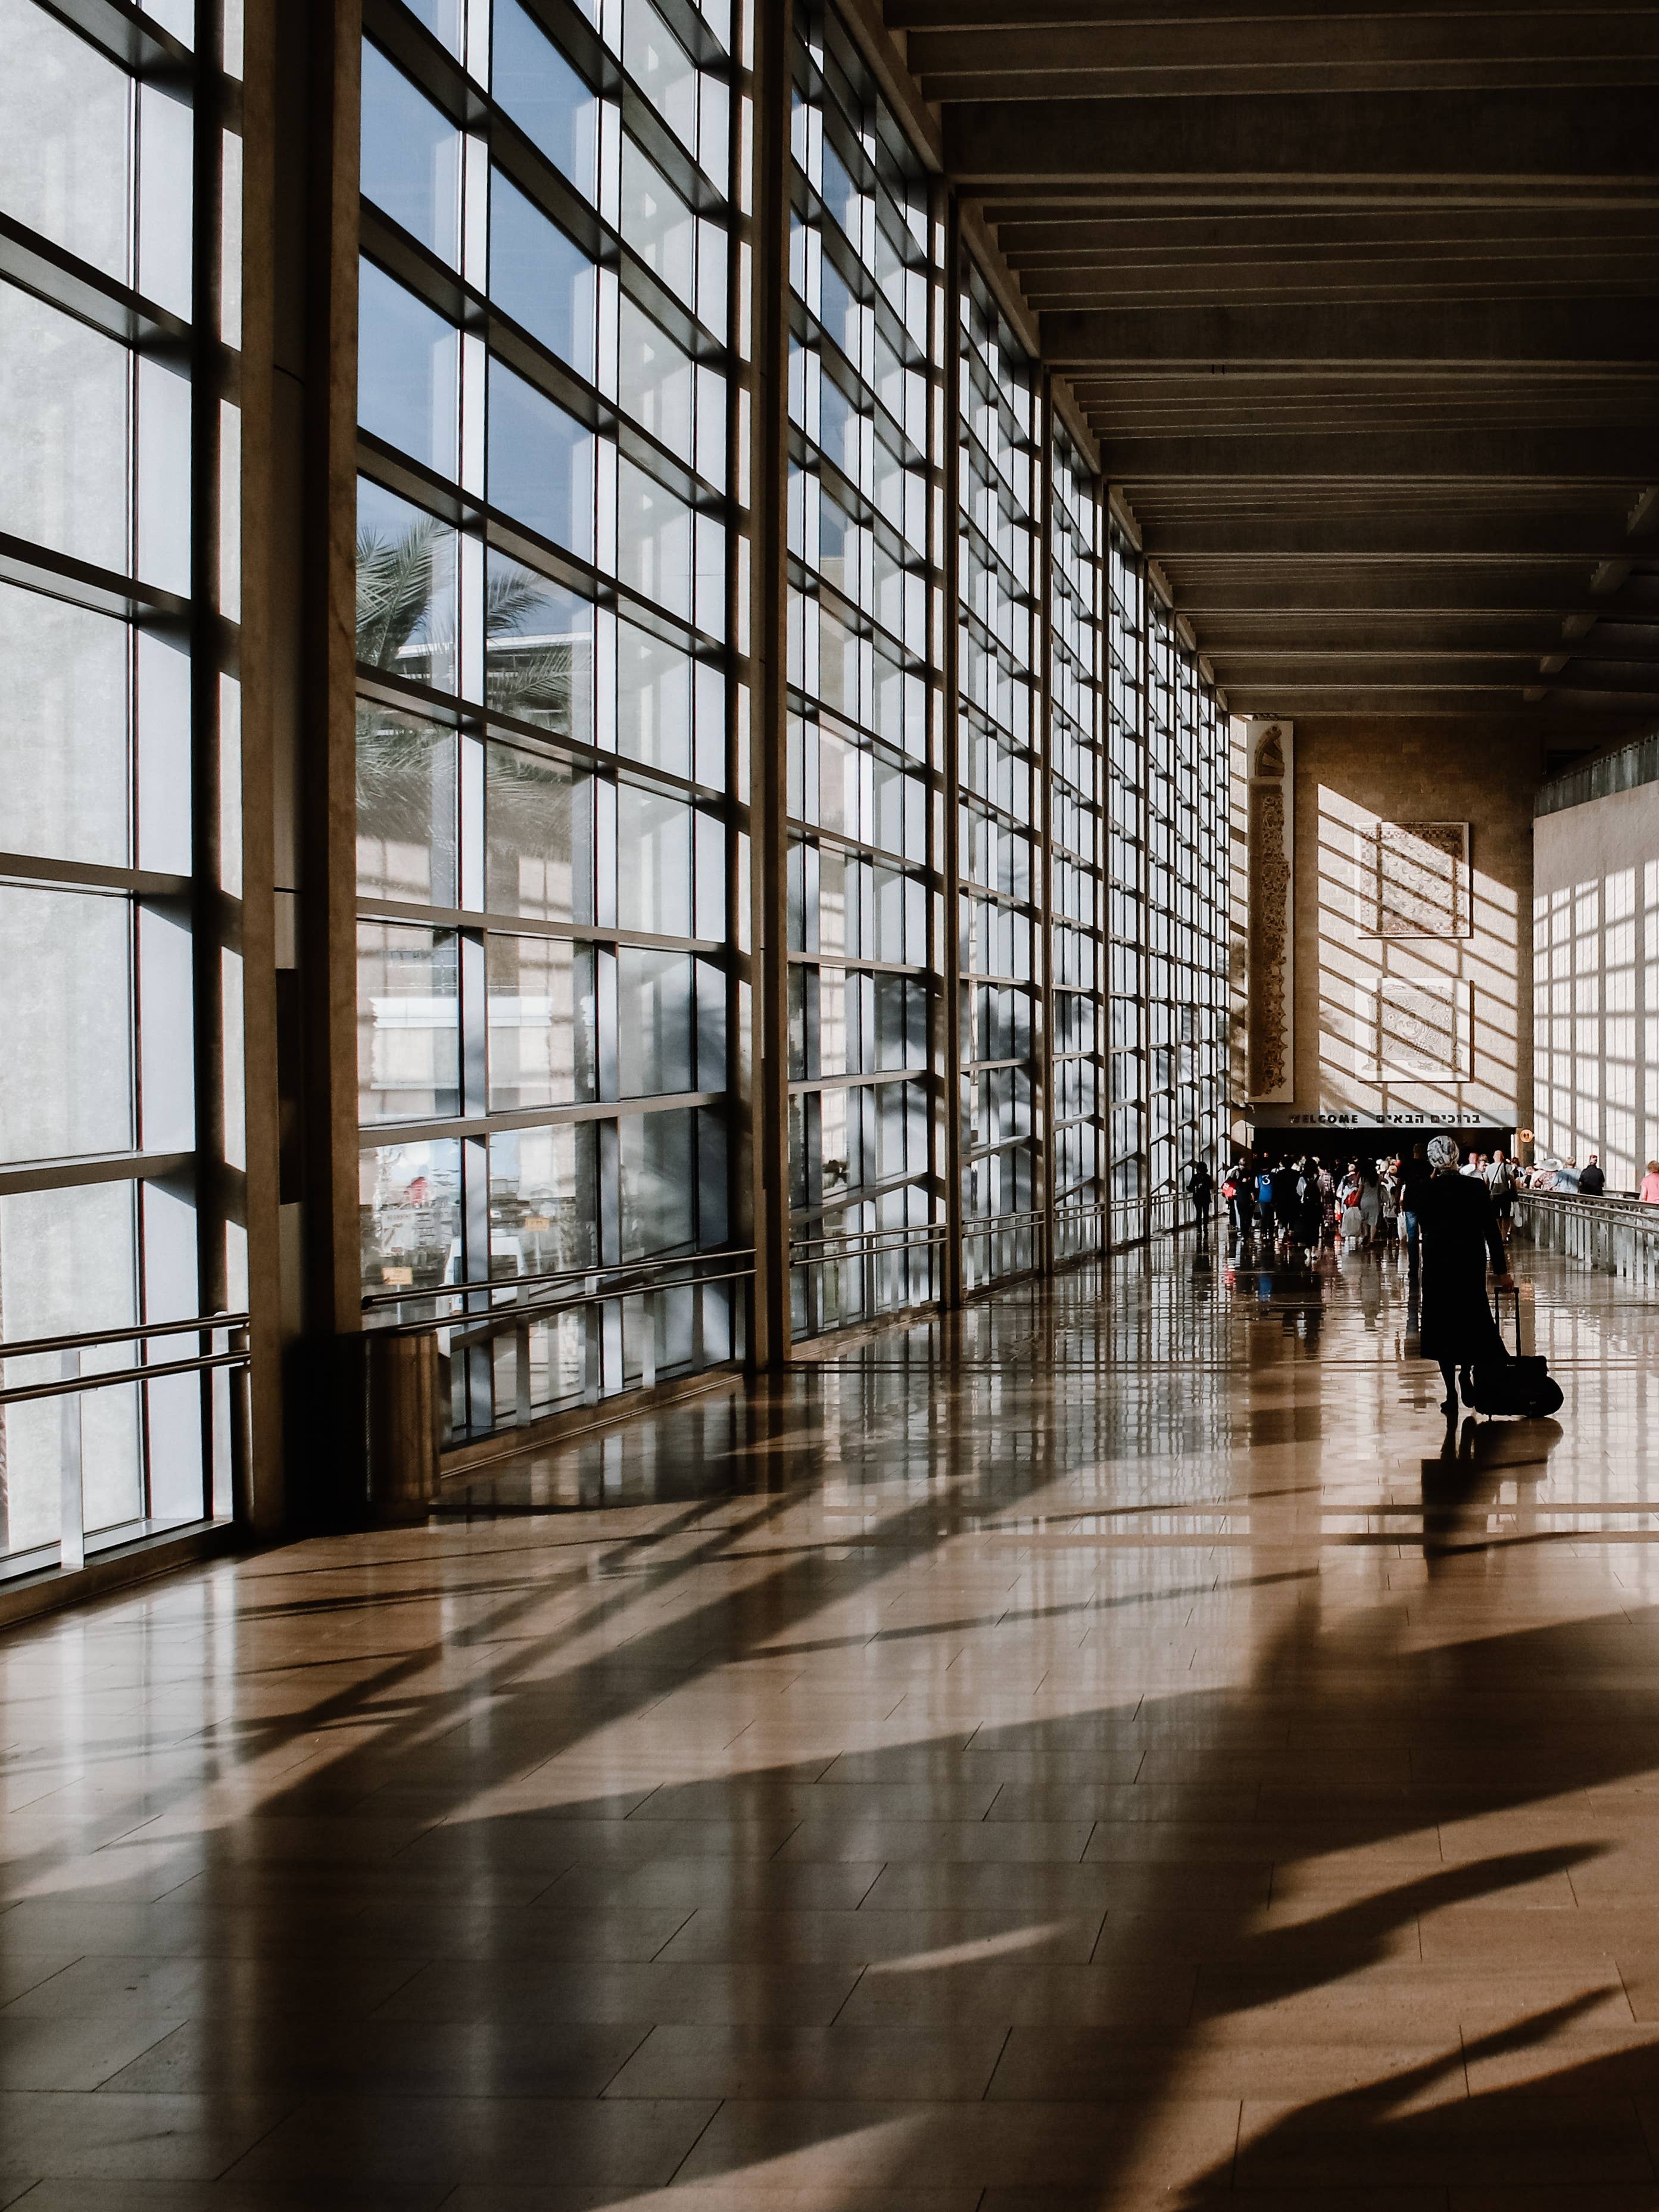 How to Survive (and Thrive) in Airports